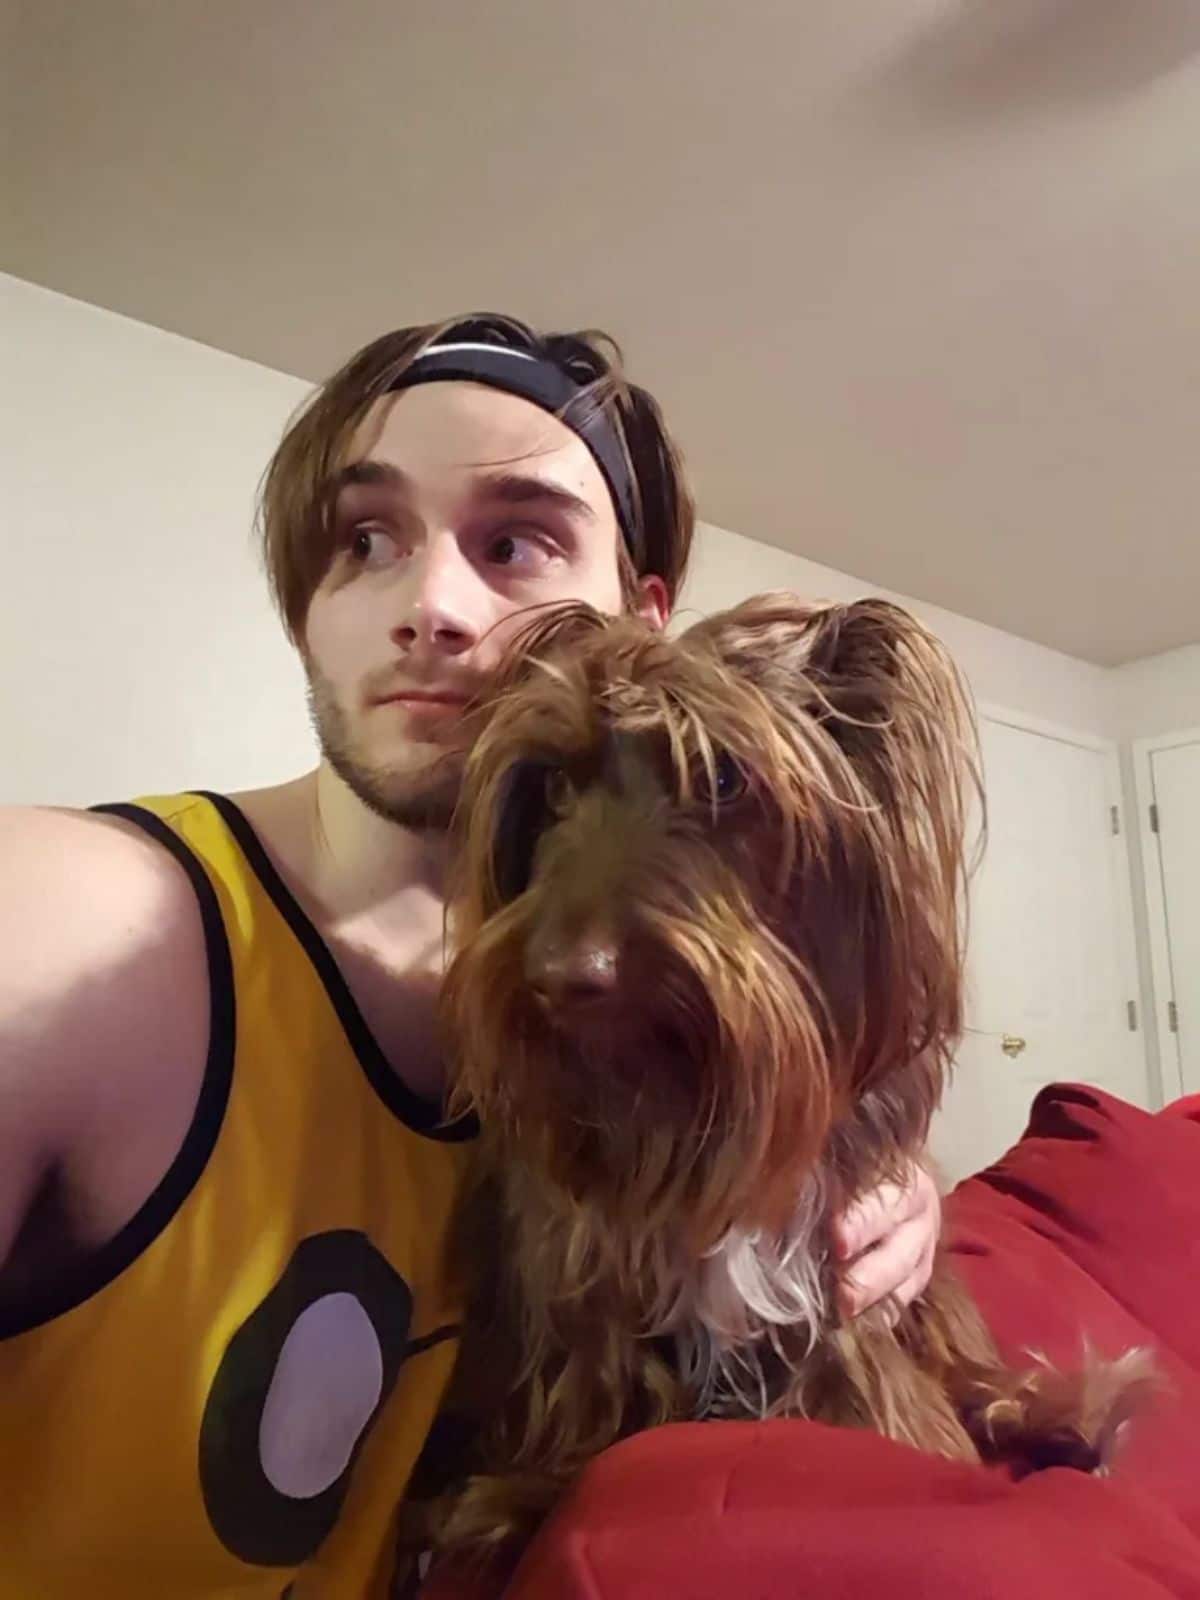 fluffy brown dog and man with similar brown hair